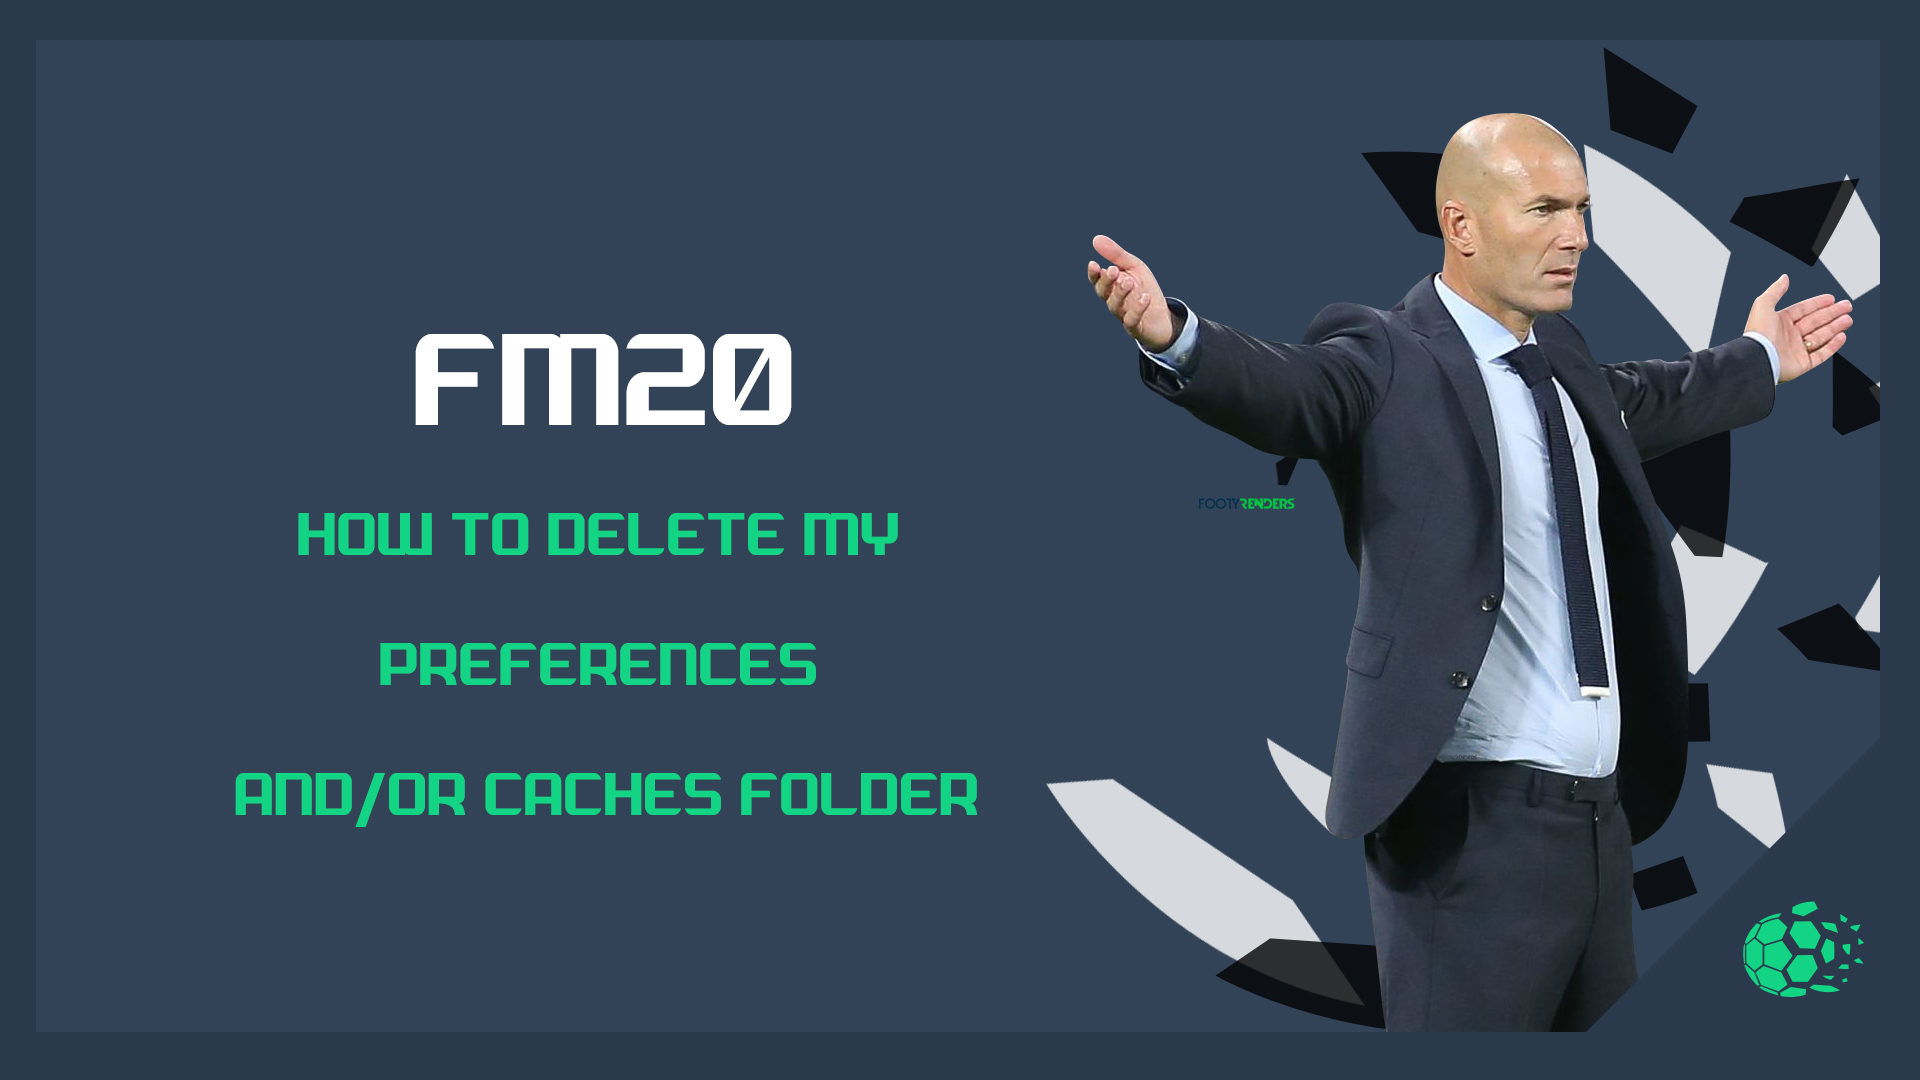 FM20 FM20: How to Delete my Preferences and/or Caches Folder